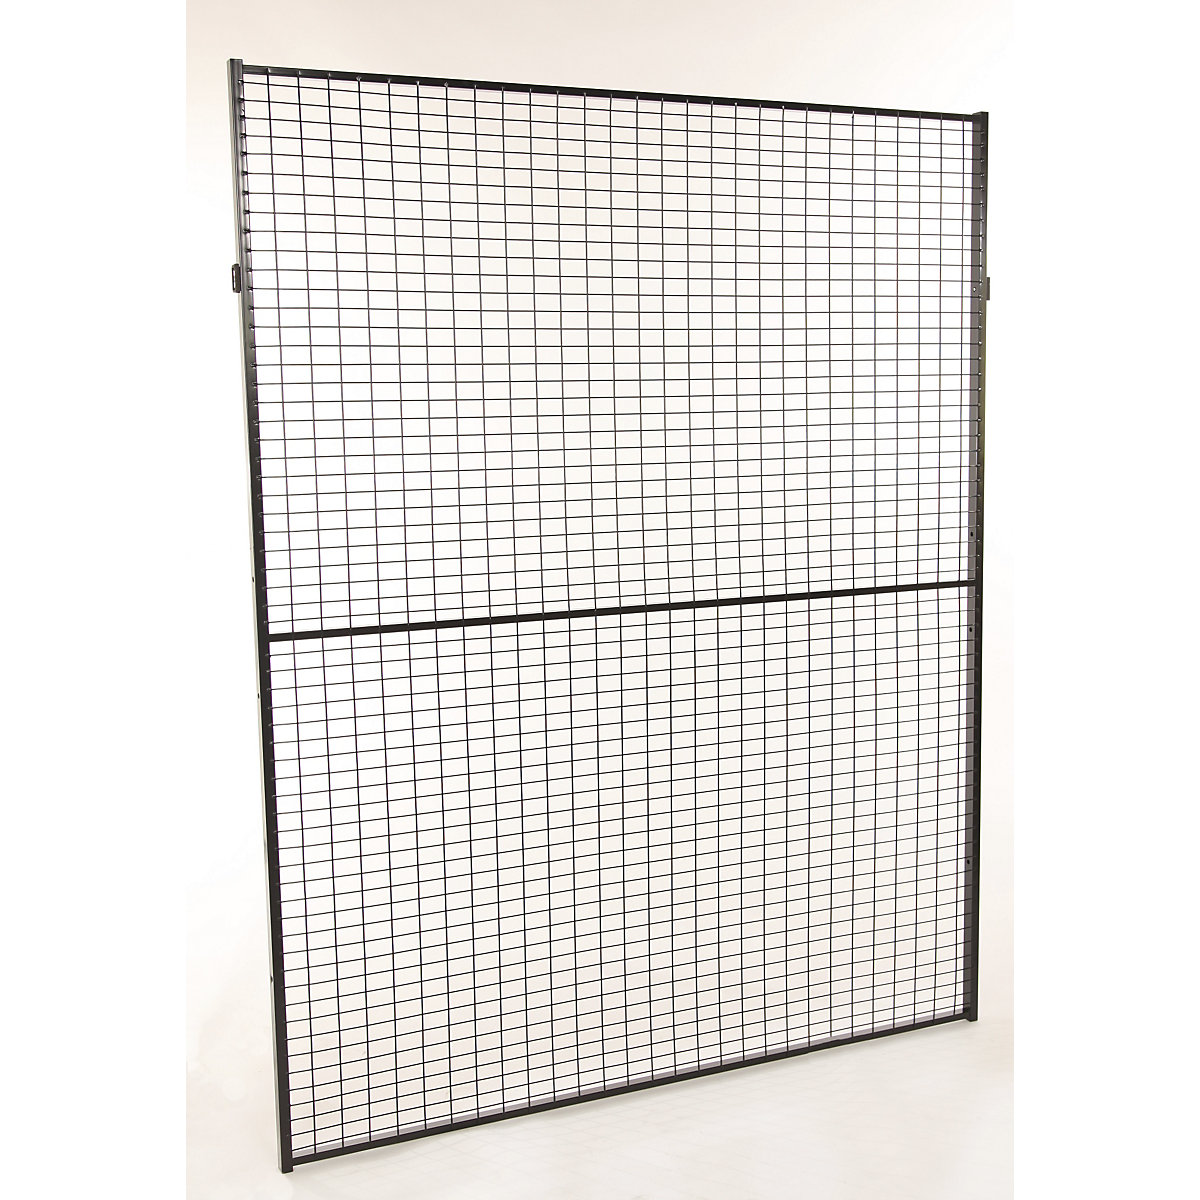 Axelent – X-GUARD CLASSIC machine protective fencing, wall section, height 1900 mm, width 1300 mm